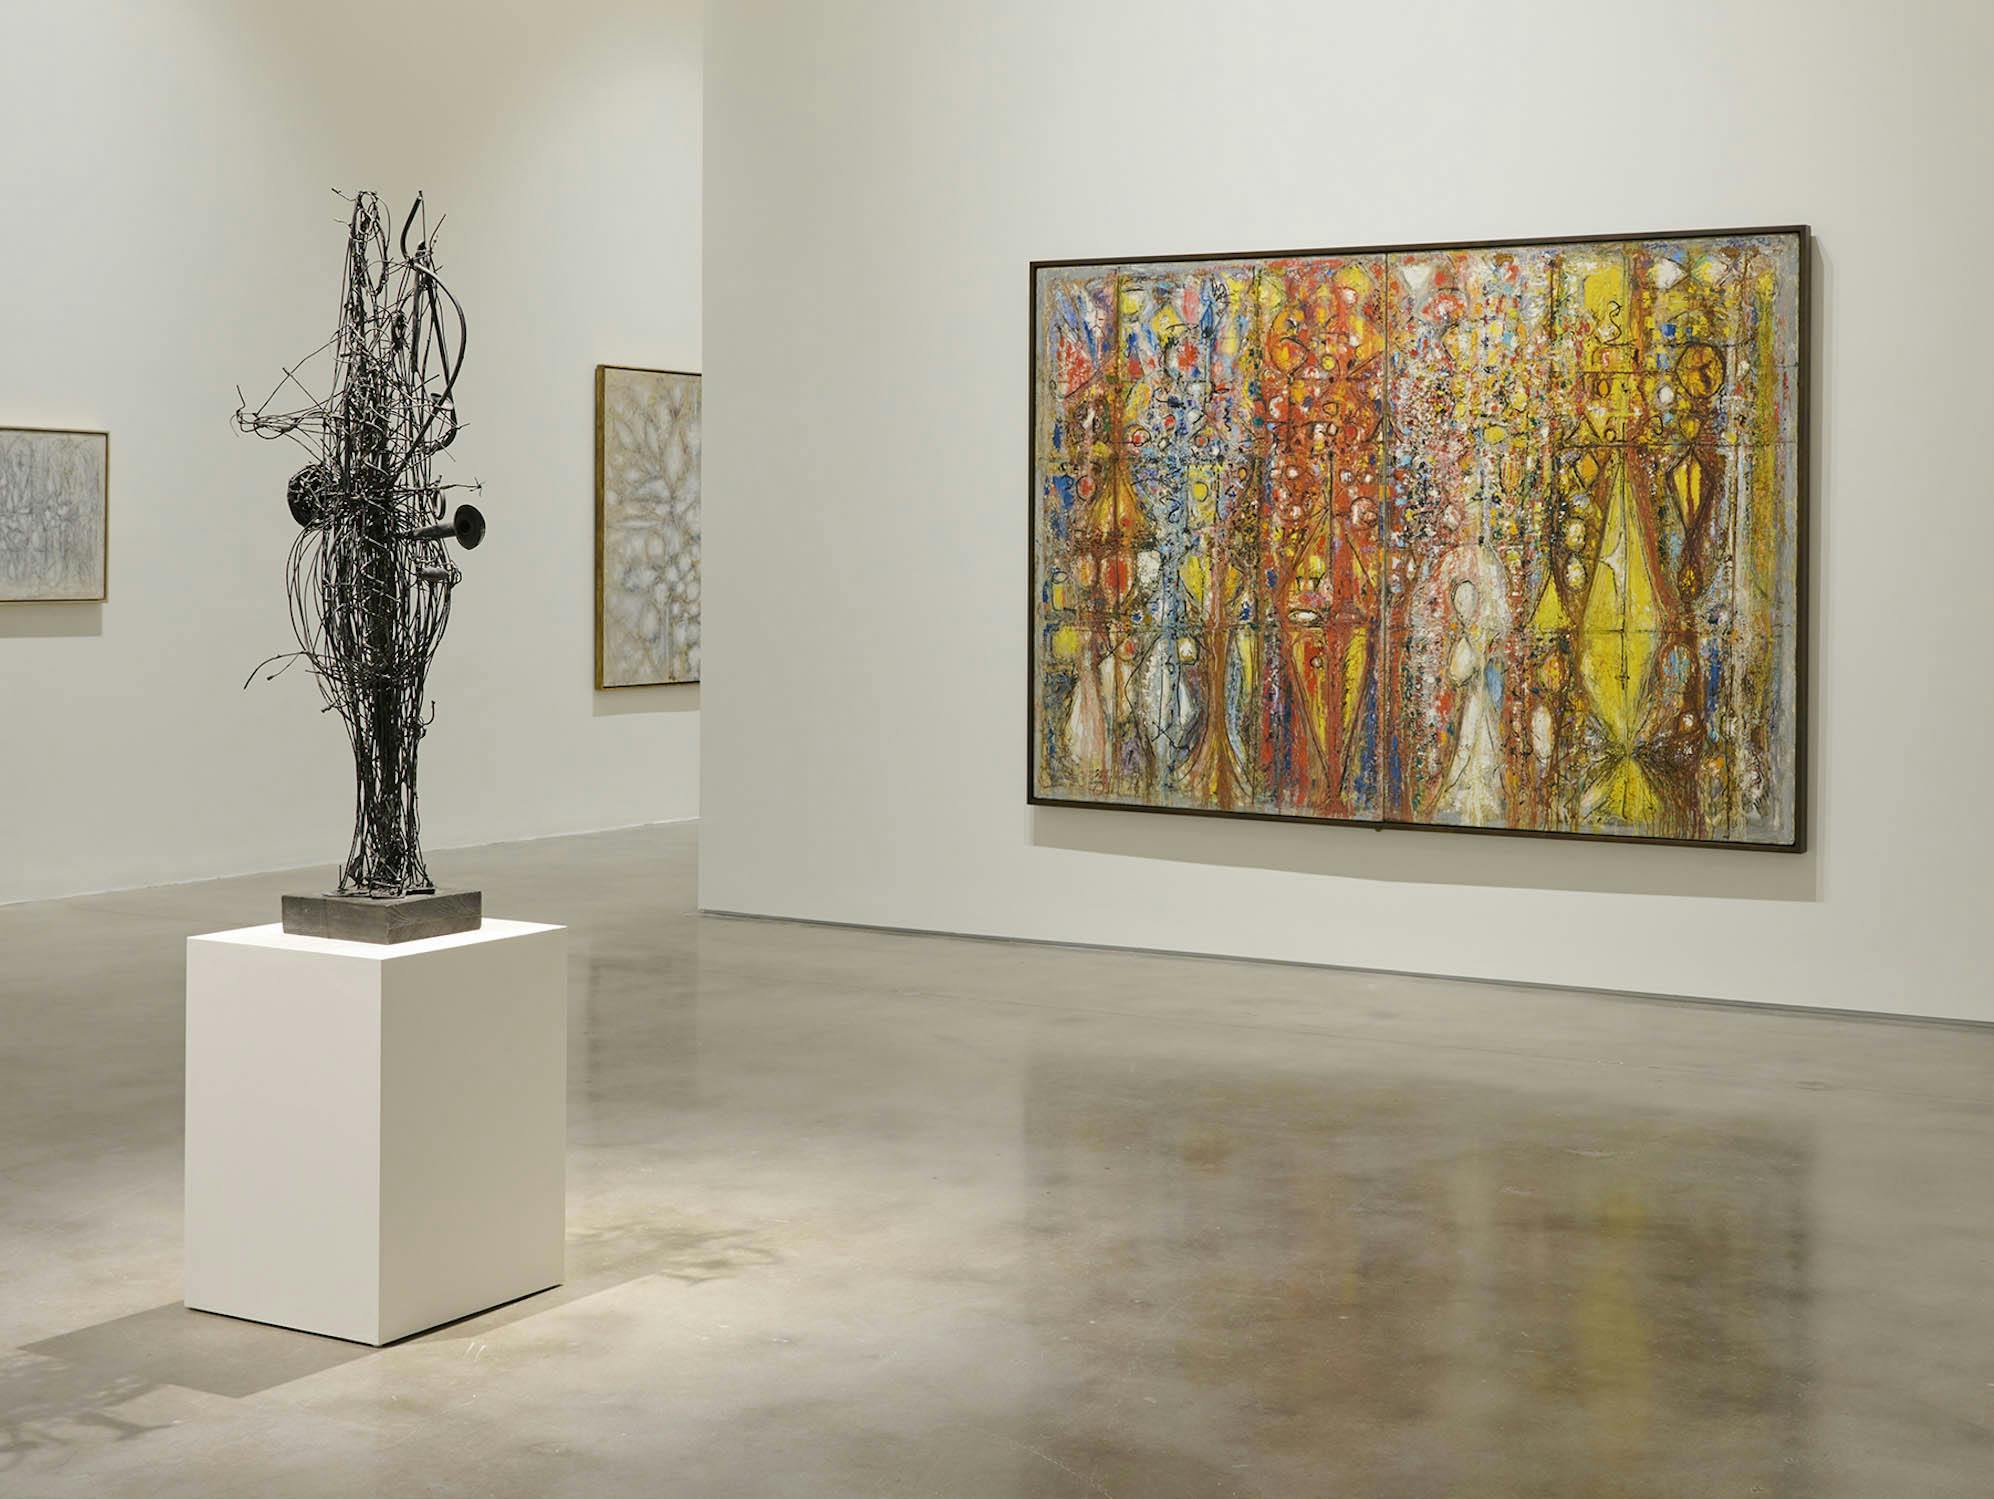 Installation view, Richard Pousette-Dart: Spirit and Substance, Pace Gallery, New York, NY, 2022.